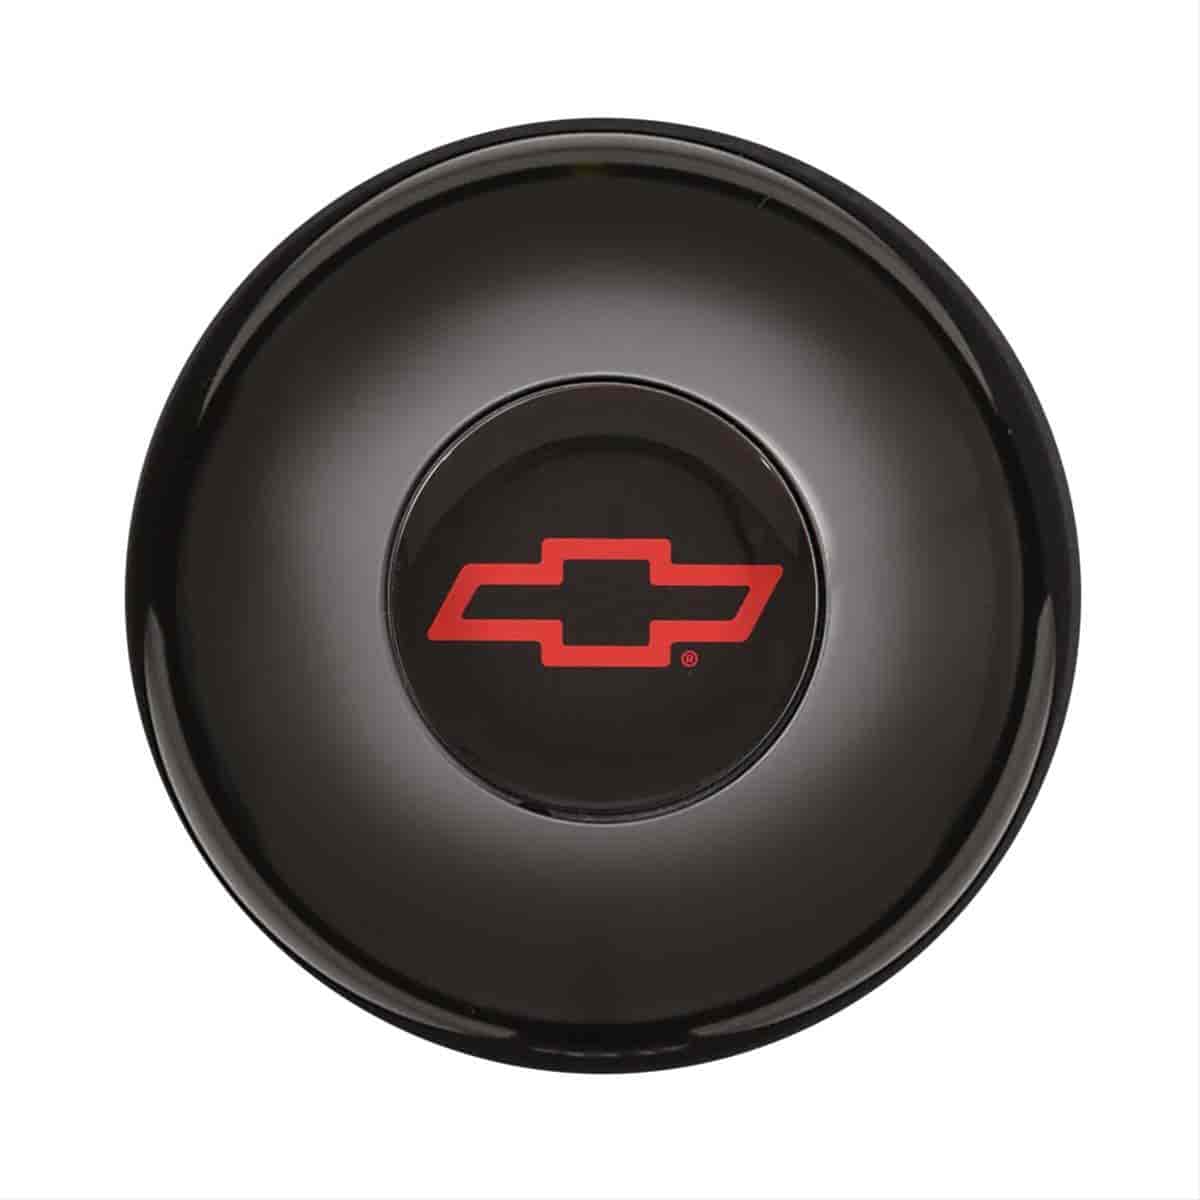 GT3 Gasser/Euro Style Horn Button Chevy Bowtie Colored Smooth Style Black Anodized